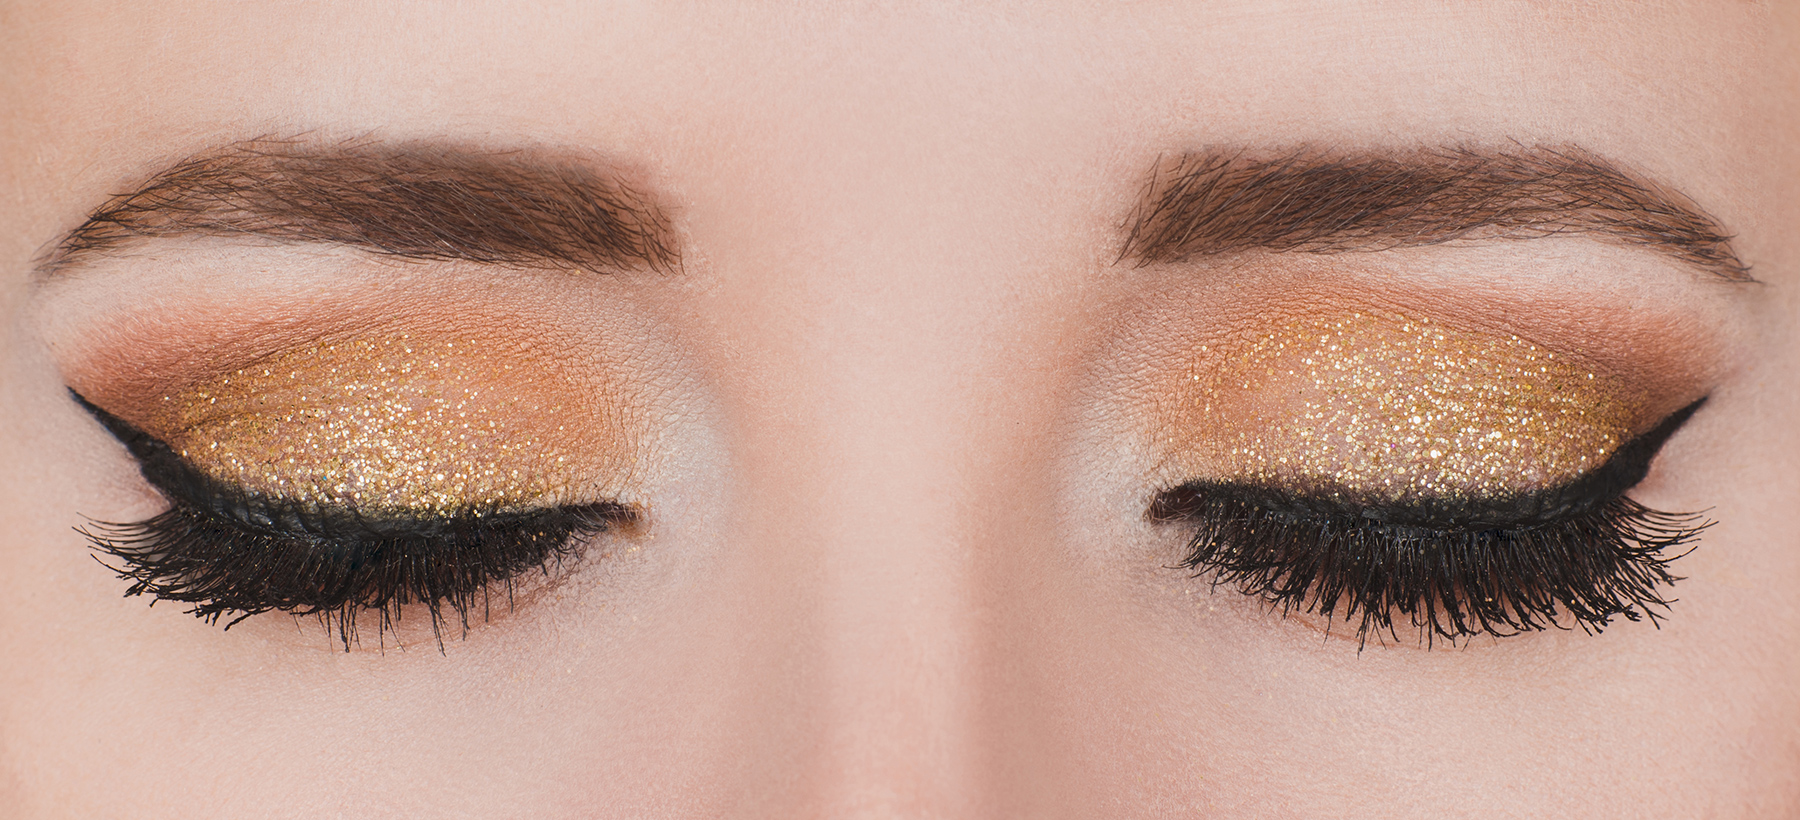 Makeup with gold glitter.